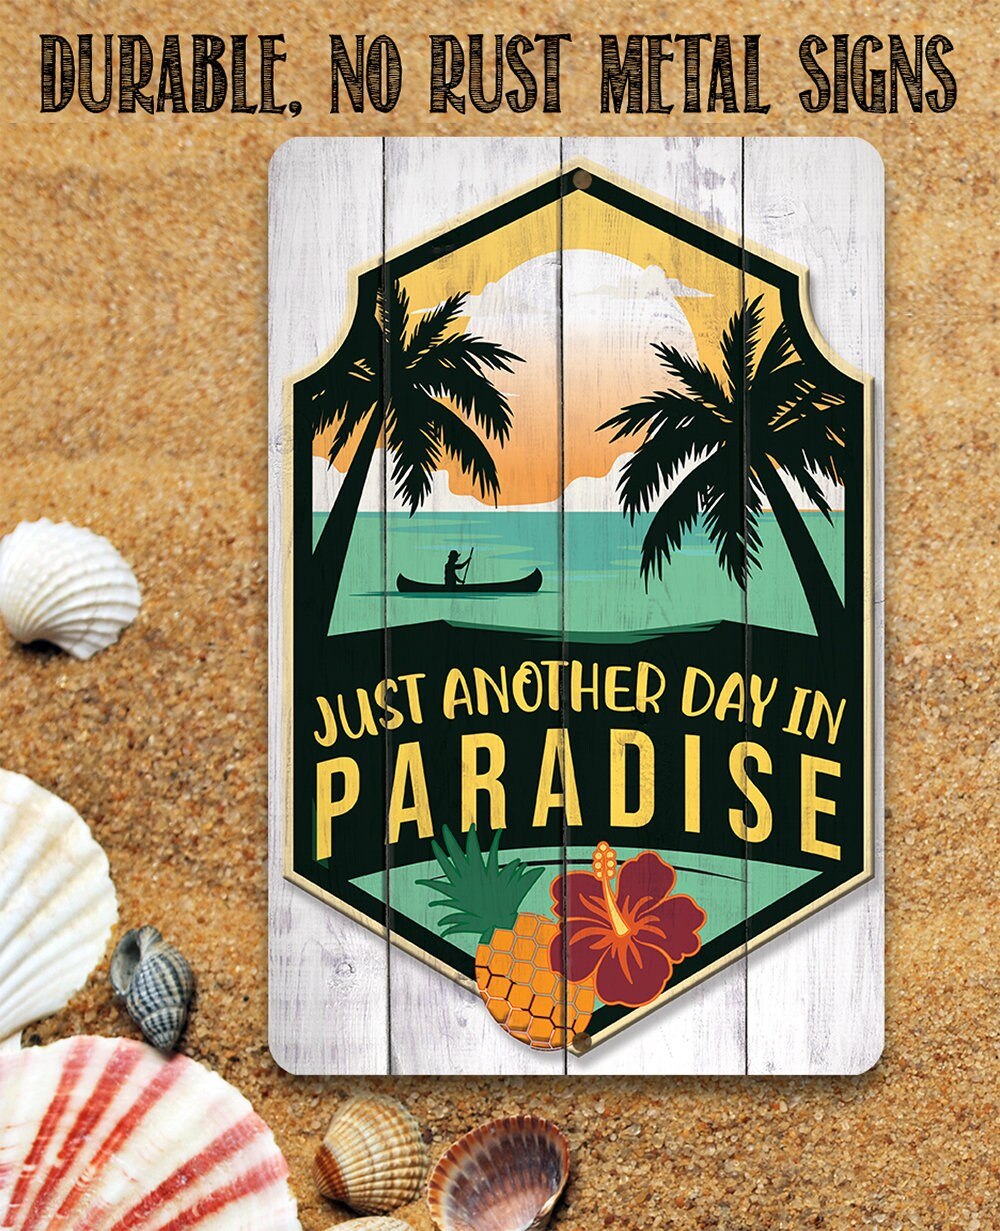 Just Another Day In Paradise - 8" x 12" or 12" x 18" Aluminum Tin Awesome Metal Poster Lone Star Art 